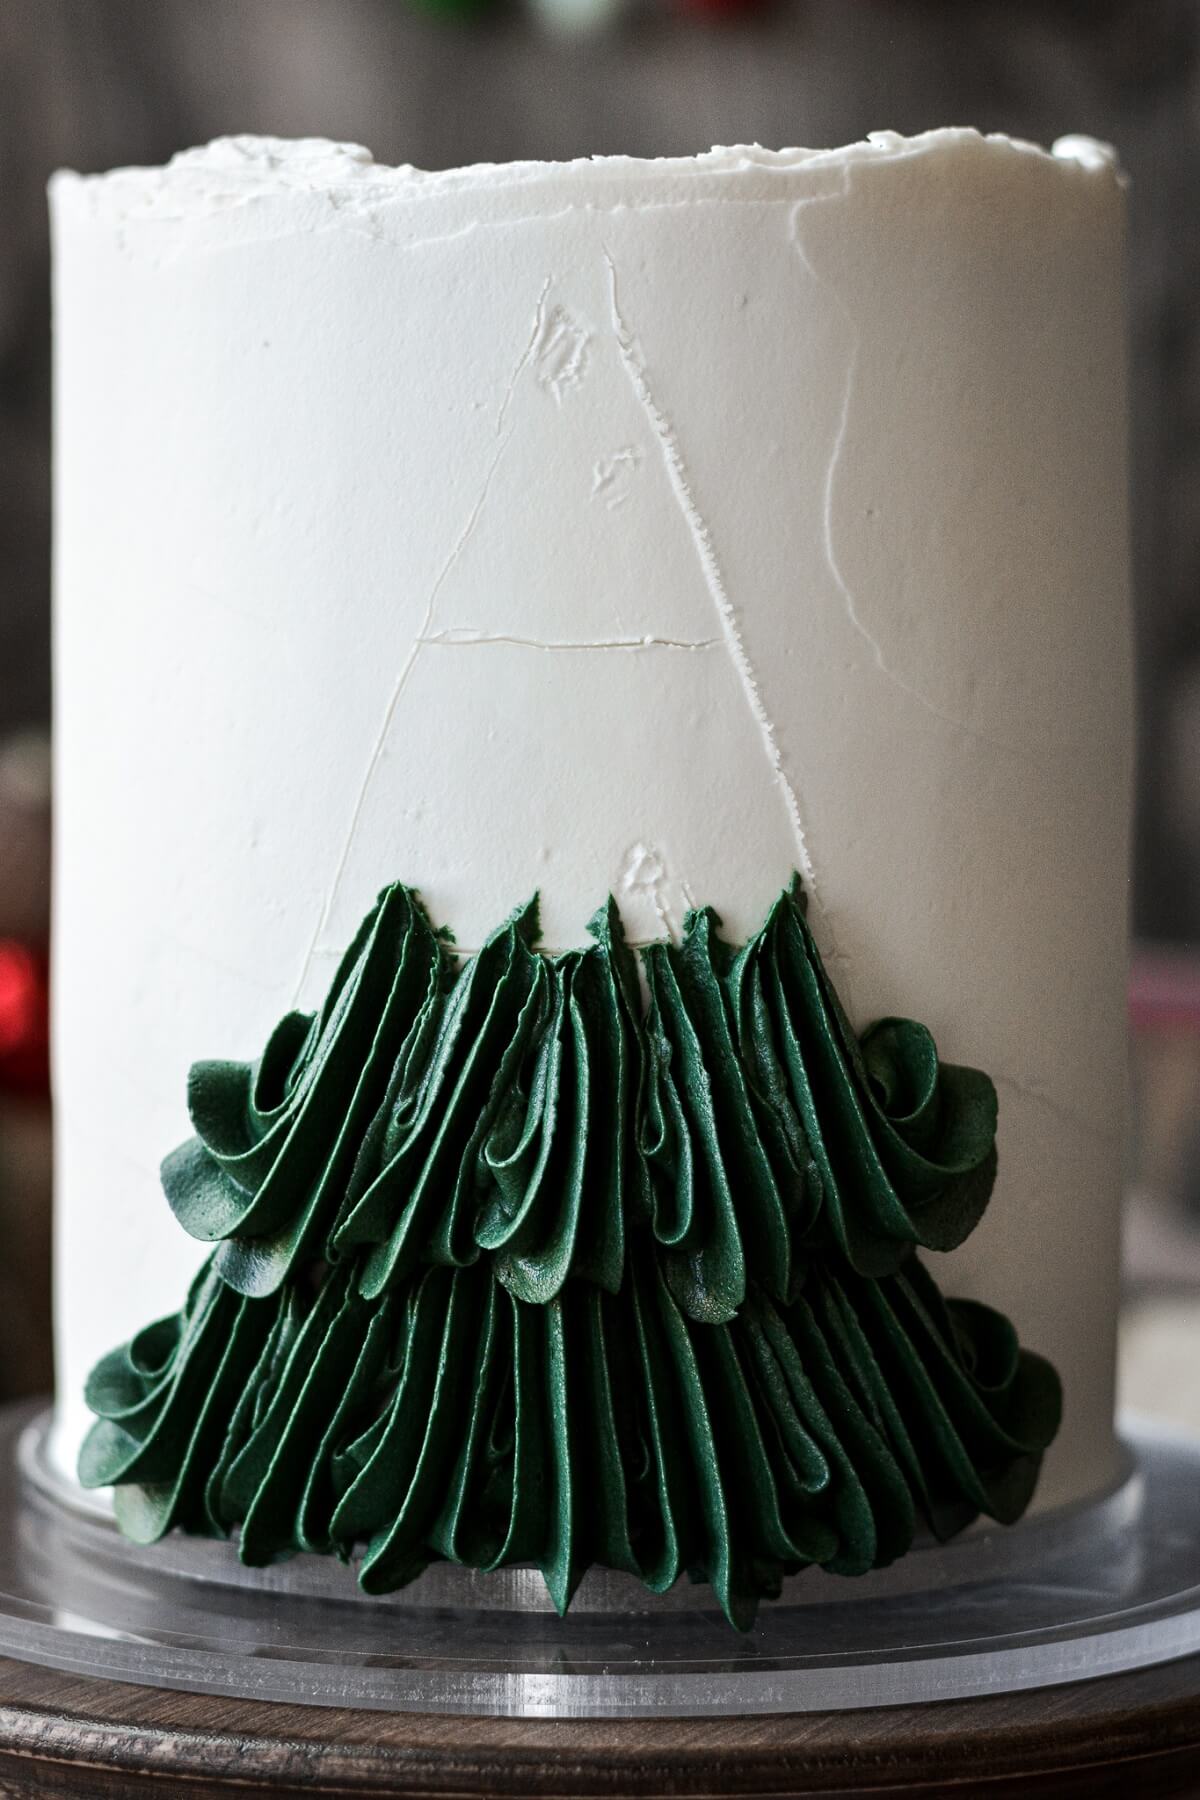 Step 6 for decorating a buttercream Christmas tree cake.